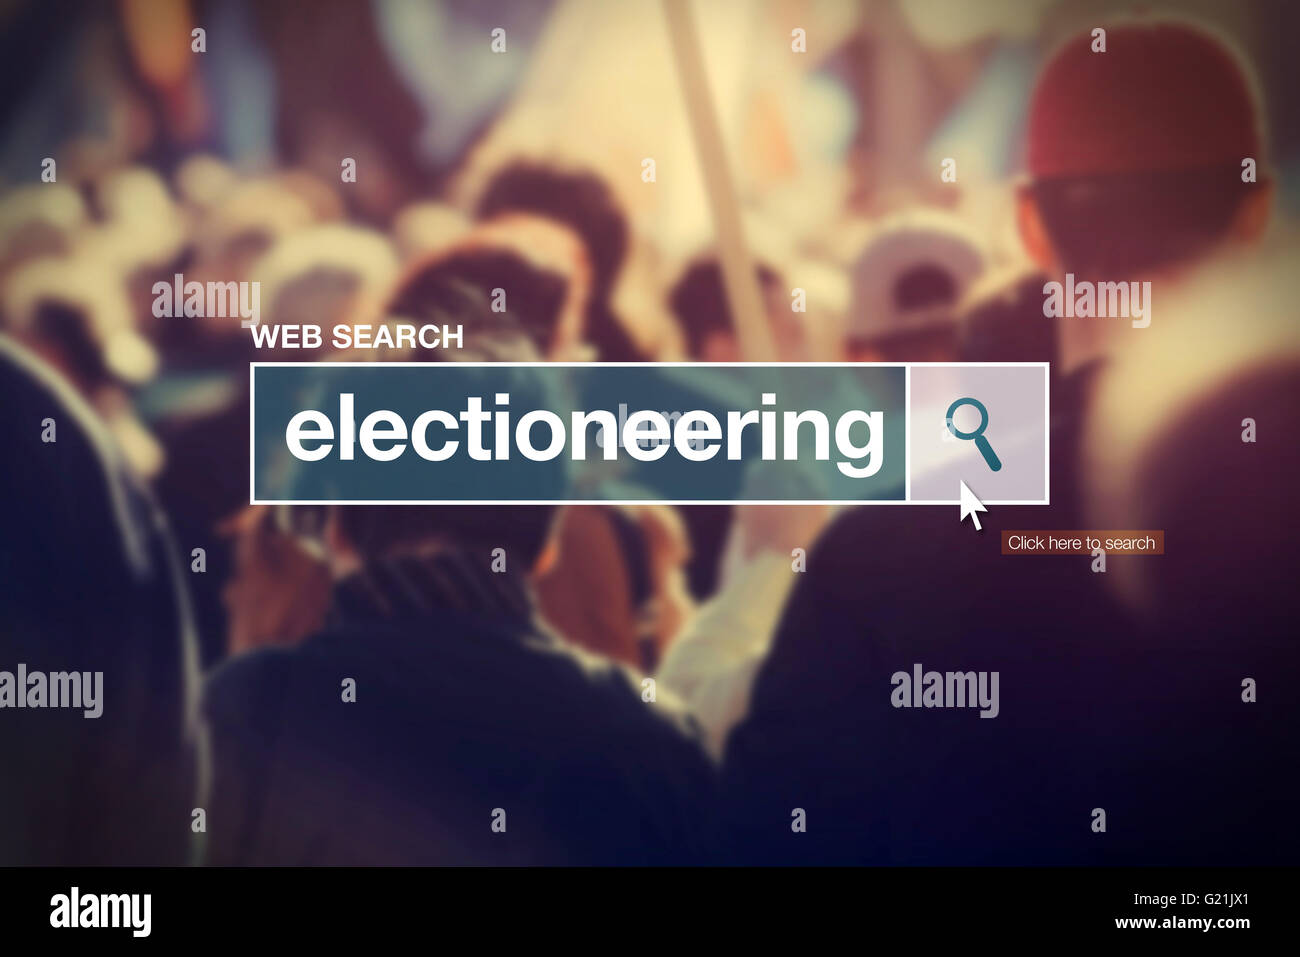 Electioneering - web search box glossary term on internet, Stock Photo